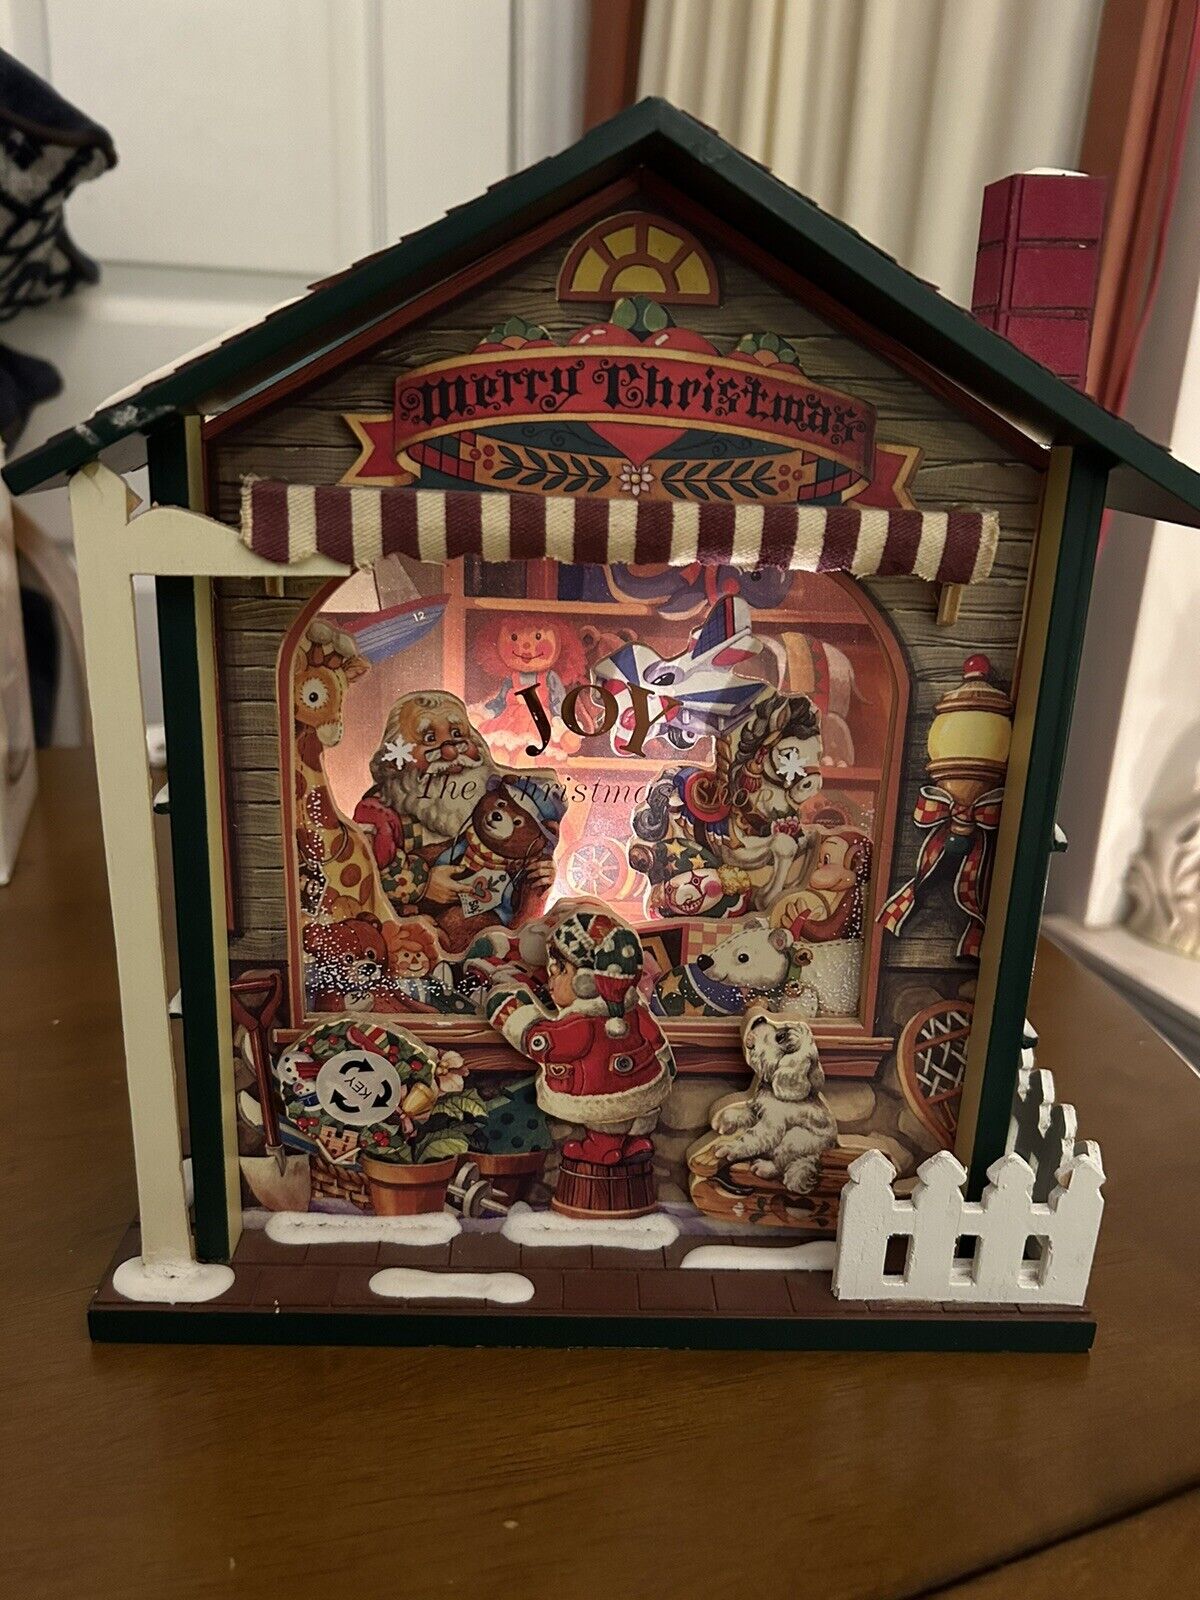 TESTED Vintage Joy The Christmas Shop Musical Wooden House 3D Animated Turn Key